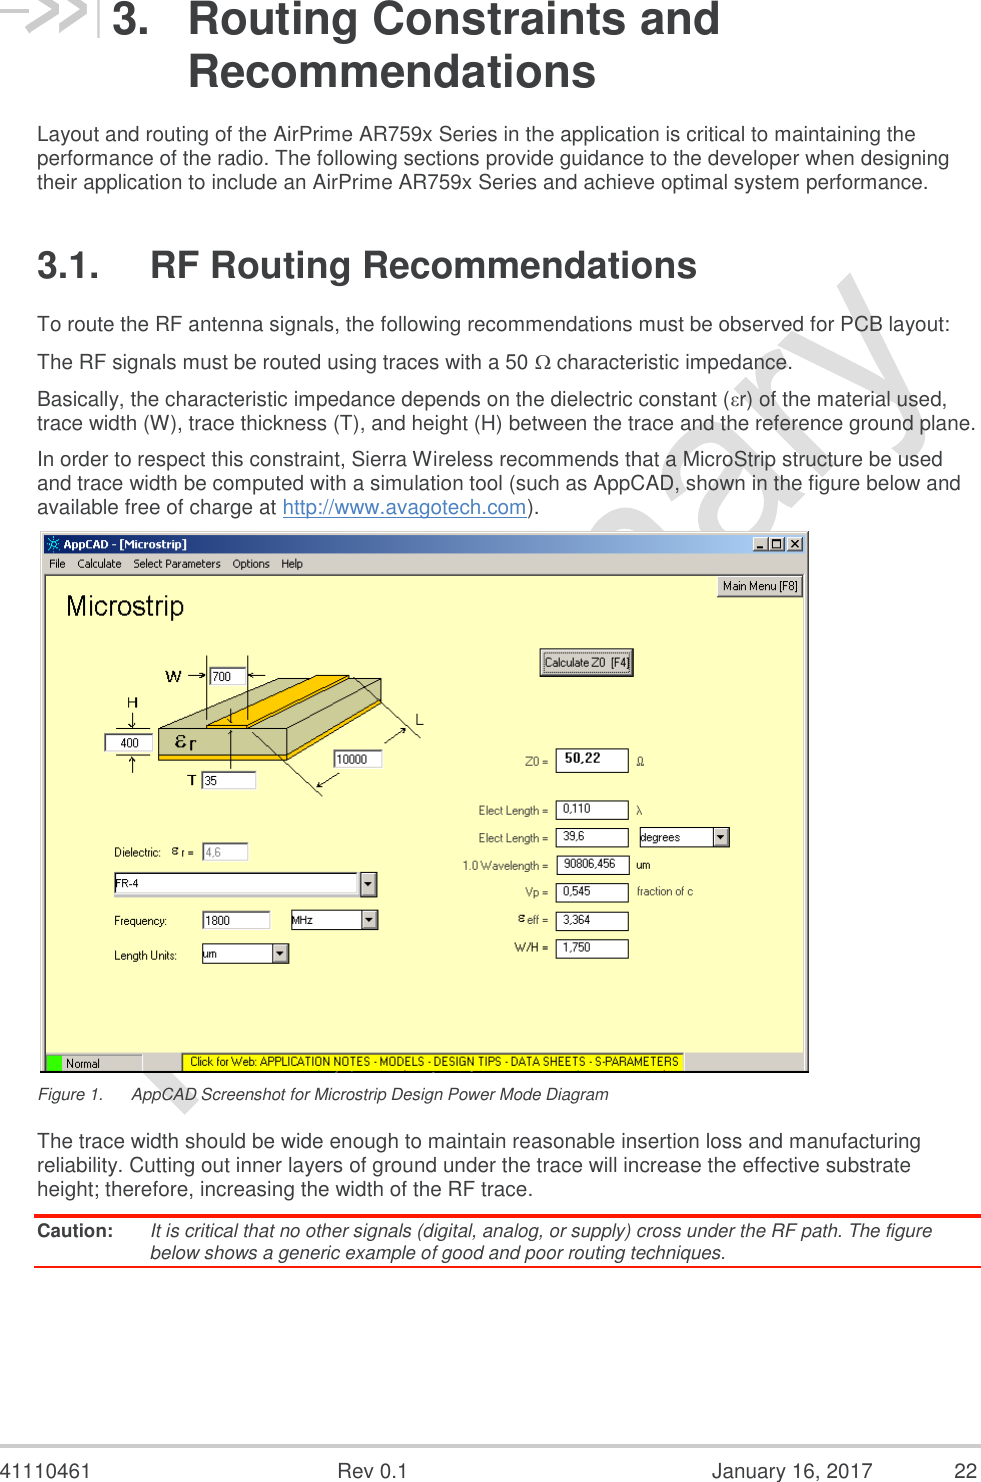  41110461  Rev 0.1  January 16, 2017  22 3.  Routing Constraints and Recommendations Layout and routing of the AirPrime AR759x Series in the application is critical to maintaining the performance of the radio. The following sections provide guidance to the developer when designing their application to include an AirPrime AR759x Series and achieve optimal system performance. 3.1.  RF Routing Recommendations To route the RF antenna signals, the following recommendations must be observed for PCB layout: The RF signals must be routed using traces with a 50  characteristic impedance. Basically, the characteristic impedance depends on the dielectric constant (εr) of the material used, trace width (W), trace thickness (T), and height (H) between the trace and the reference ground plane. In order to respect this constraint, Sierra Wireless recommends that a MicroStrip structure be used and trace width be computed with a simulation tool (such as AppCAD, shown in the figure below and available free of charge at http://www.avagotech.com).  Figure 1.  AppCAD Screenshot for Microstrip Design Power Mode Diagram The trace width should be wide enough to maintain reasonable insertion loss and manufacturing reliability. Cutting out inner layers of ground under the trace will increase the effective substrate height; therefore, increasing the width of the RF trace. Caution:  It is critical that no other signals (digital, analog, or supply) cross under the RF path. The figure below shows a generic example of good and poor routing techniques. 